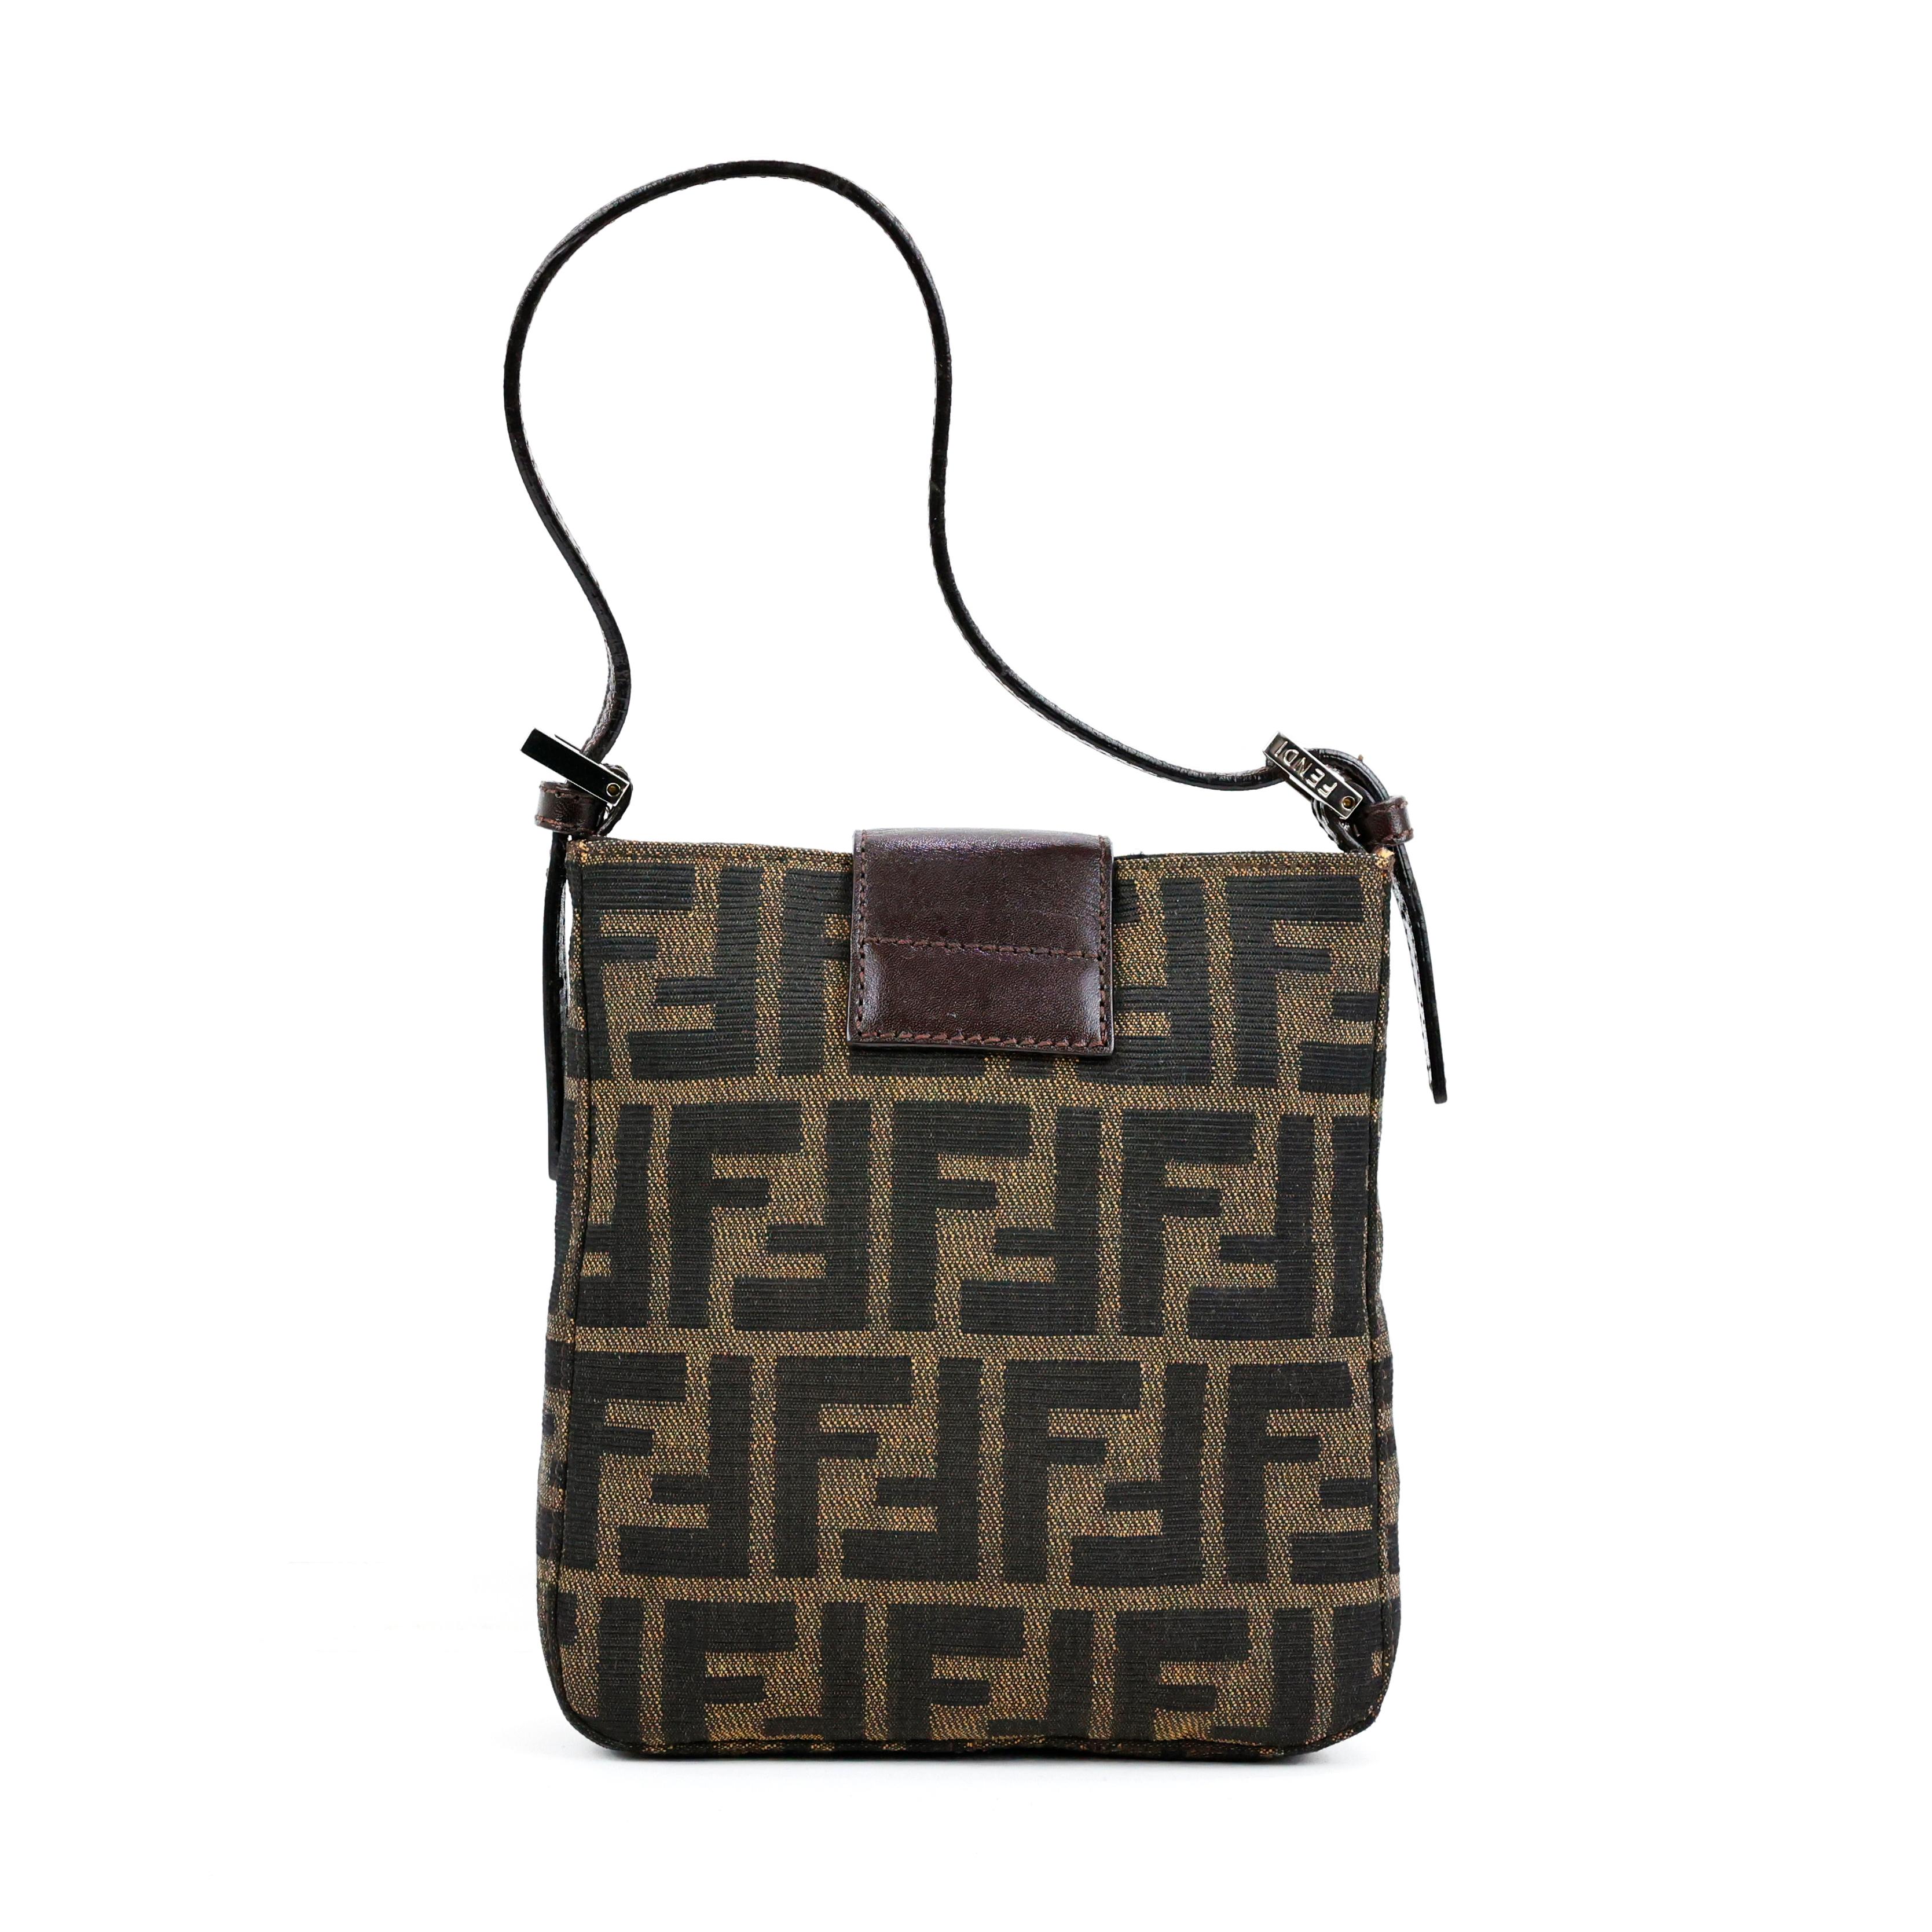 Fendi baguette - rectangle shape vertical baguette in brown zucca monogram canvas and leather, silver hardware. Hard-to-find piece.

Condition:
Really good. To note: slight scratches on the front